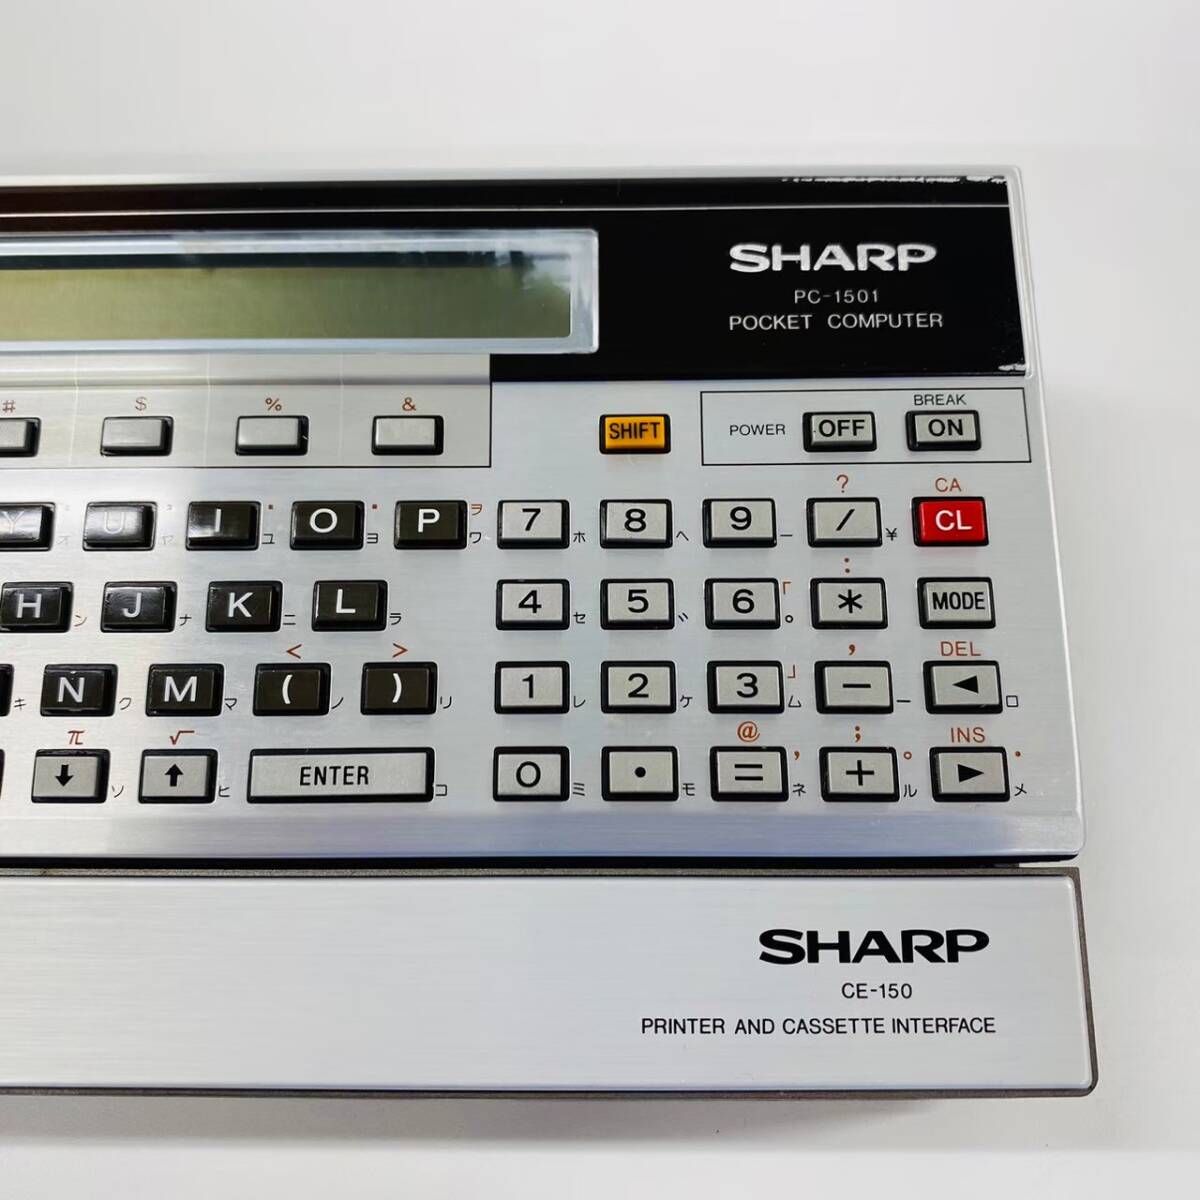 G662-M1-2467 SHARP sharp pocket computer - cassette interface CE-150 electrification has confirmed pocket computer accessory equipped ④